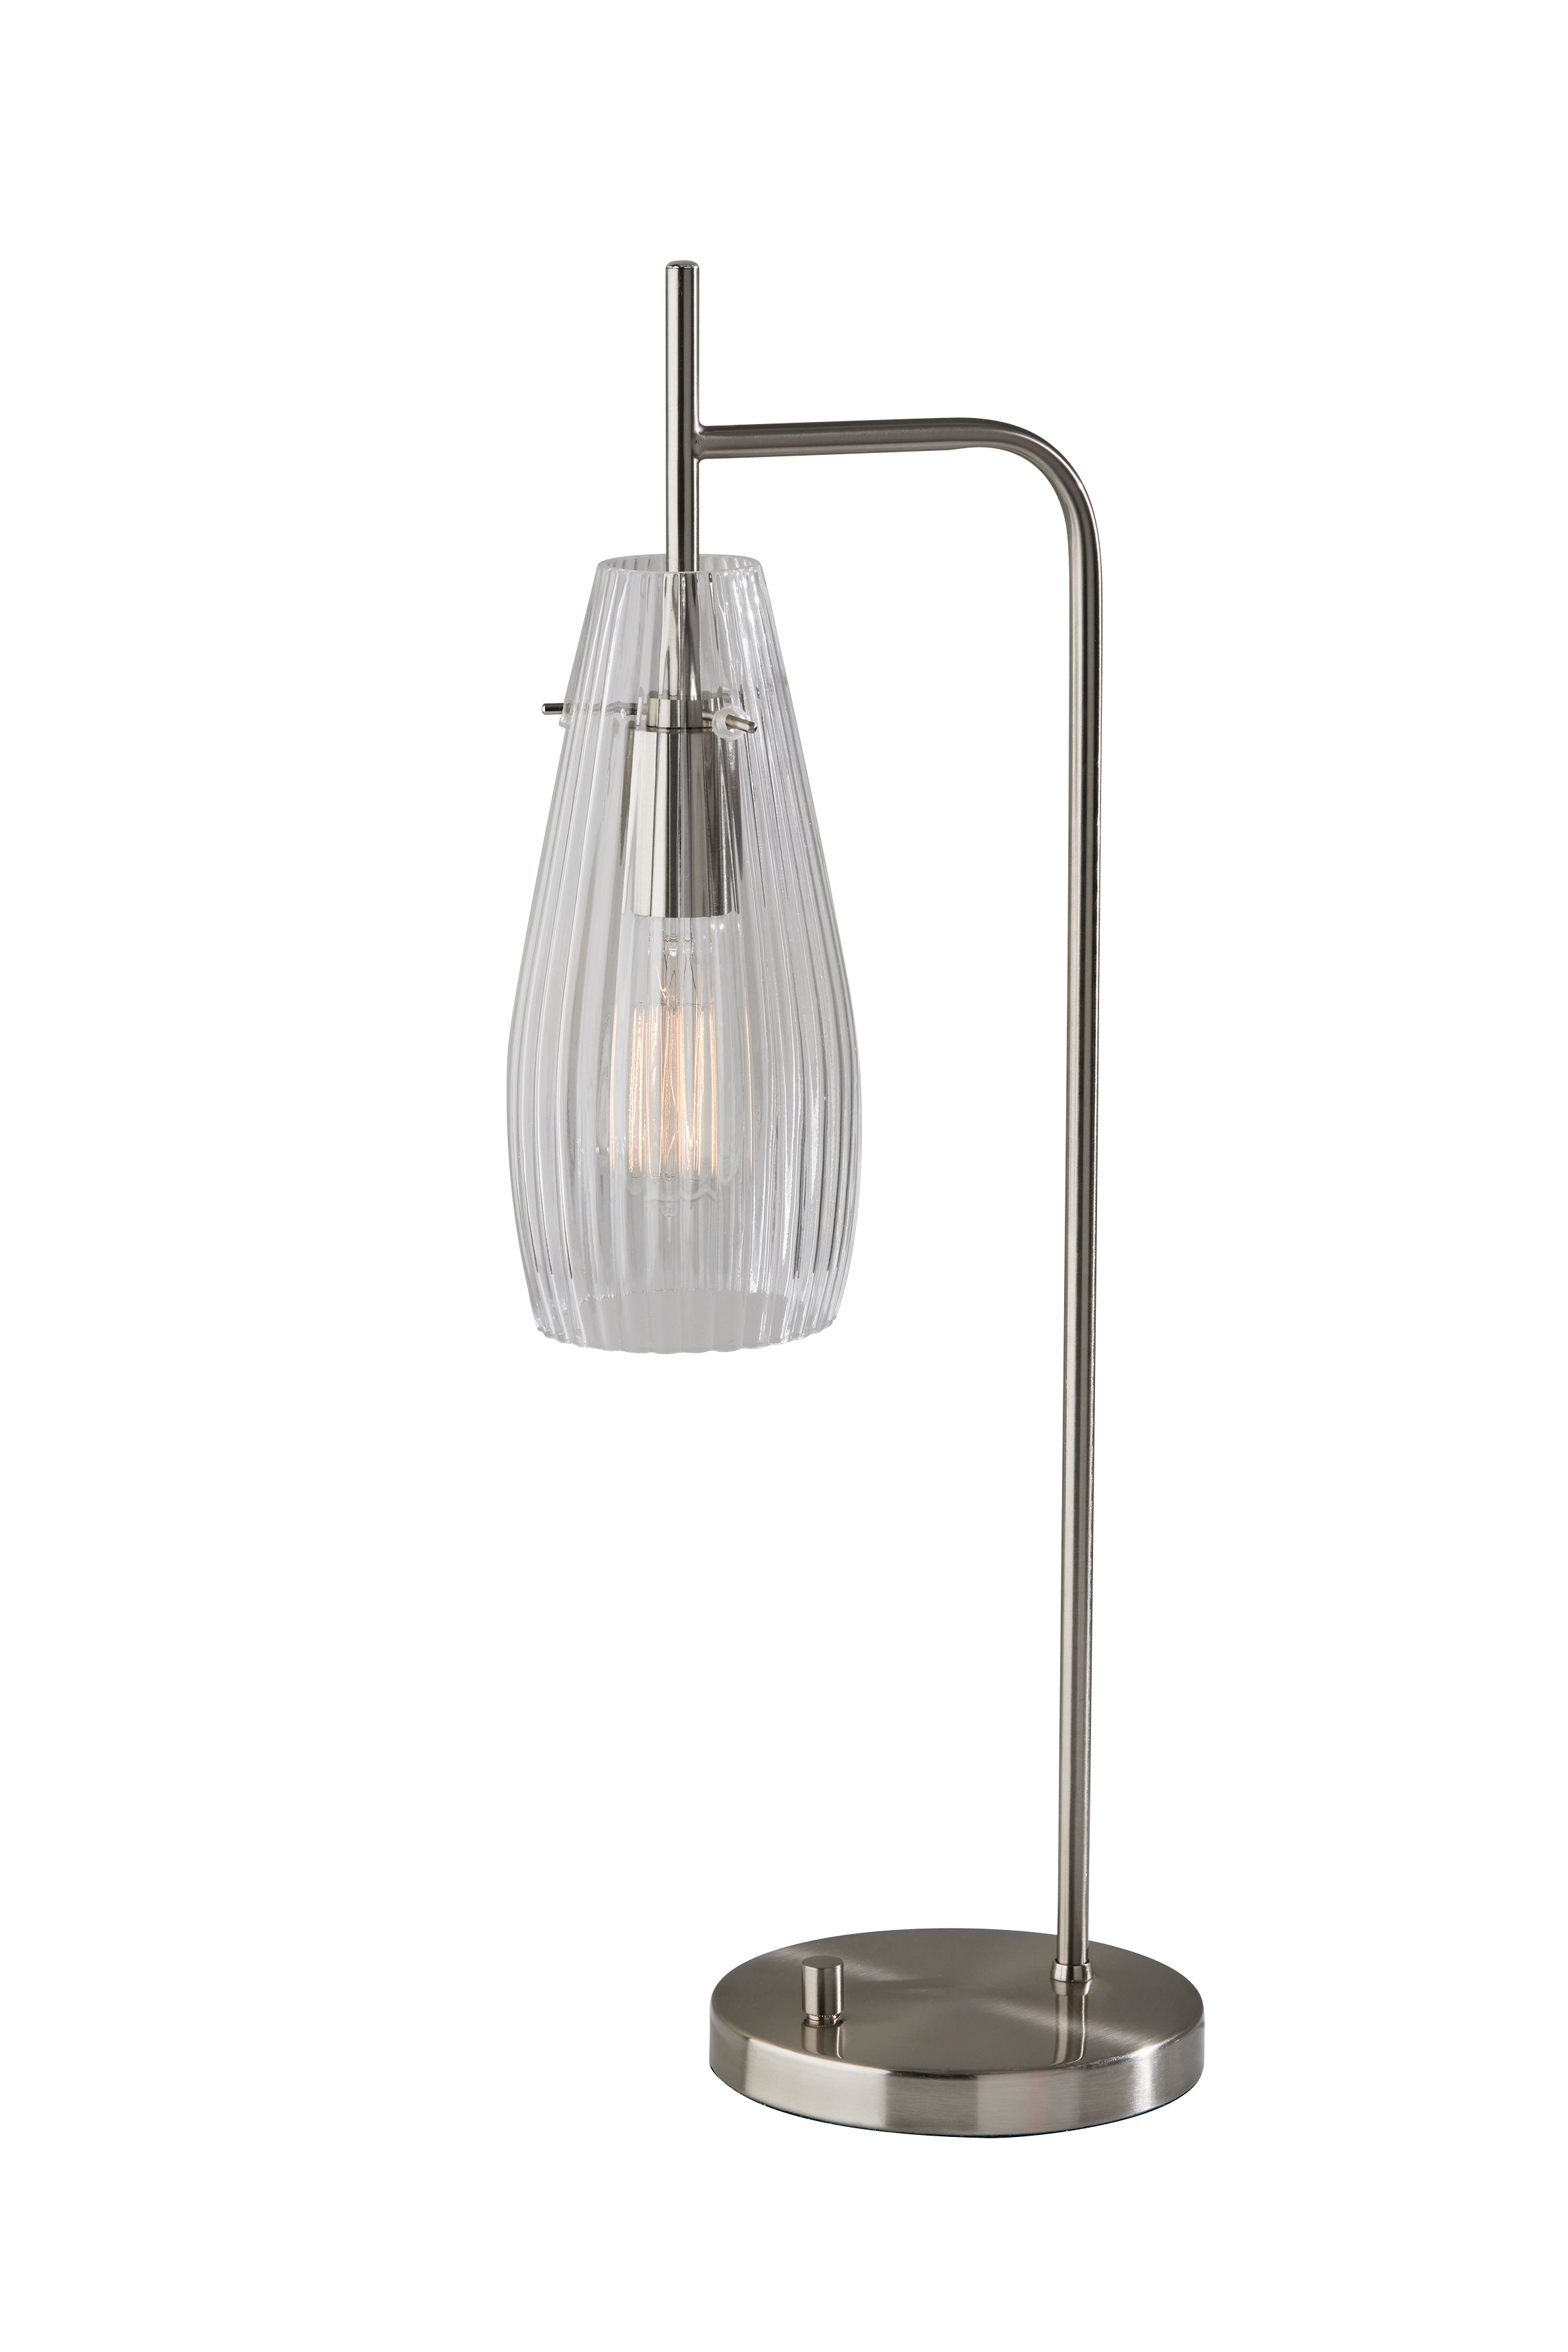 LAYLA Table lamp Stainless steel - 2147-22 | ADESSO